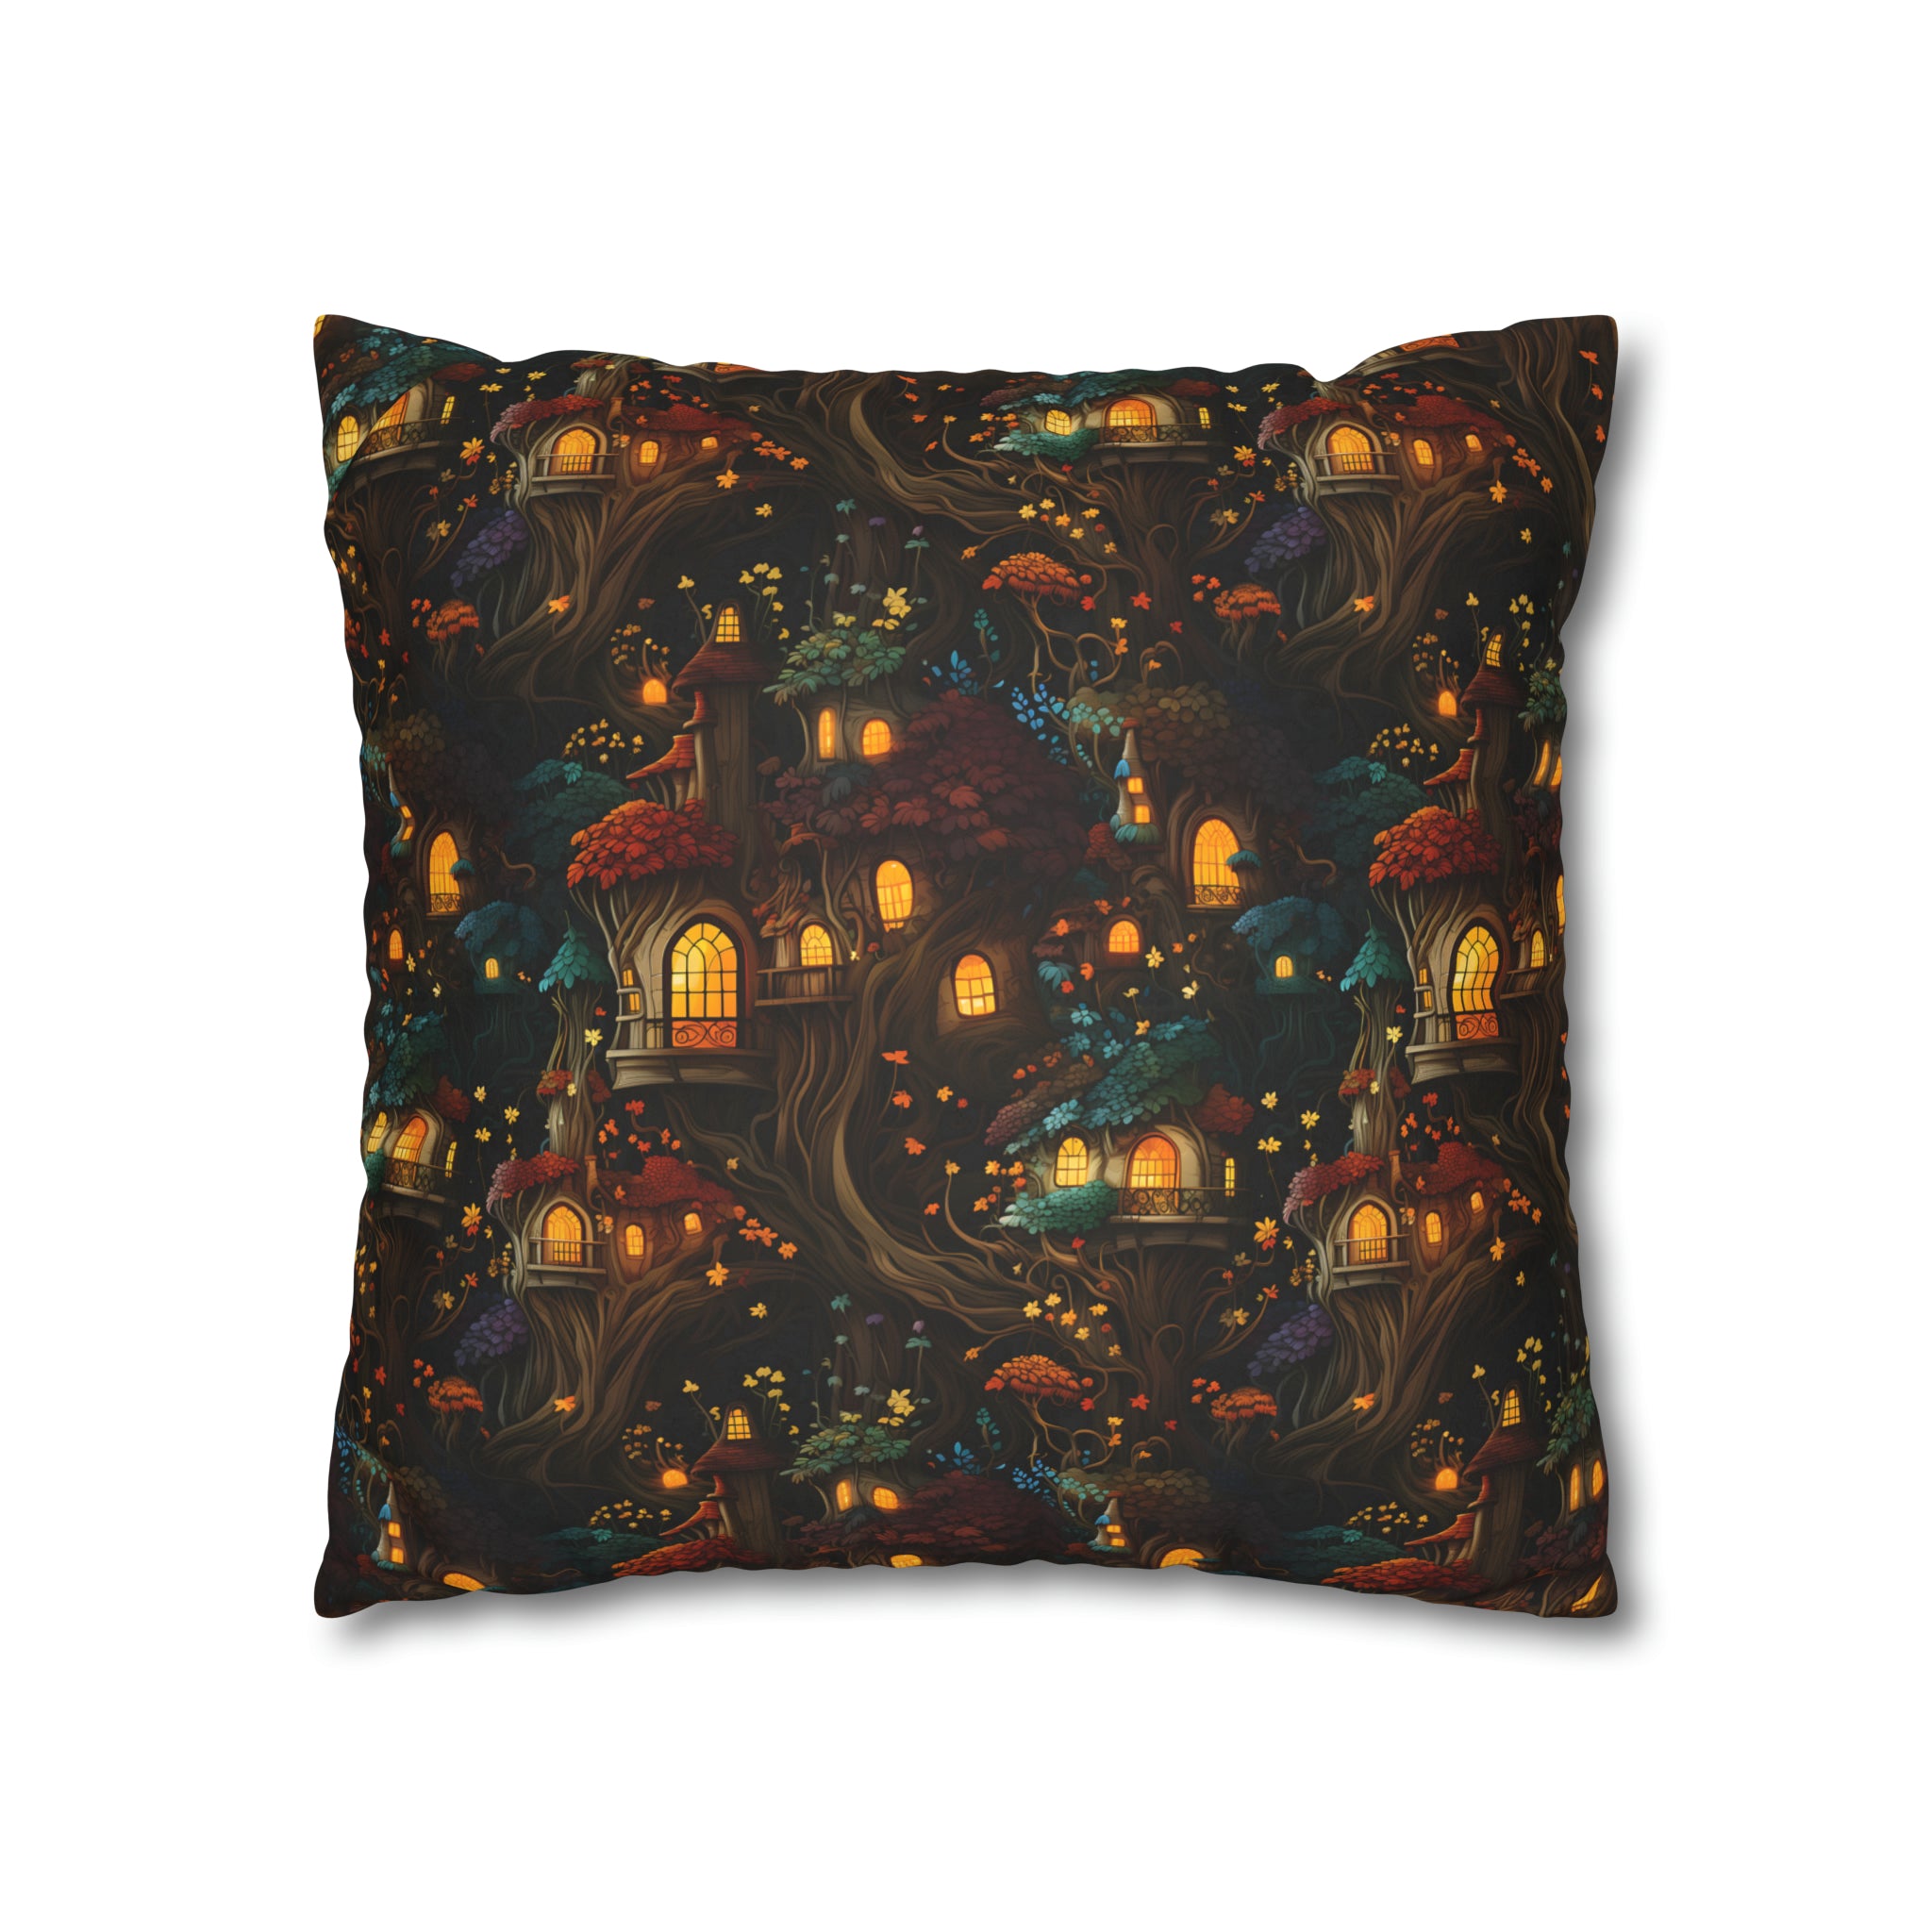 Fairy Hideaway Faux Suede Pillow Cover: Enchanted Forest Decor